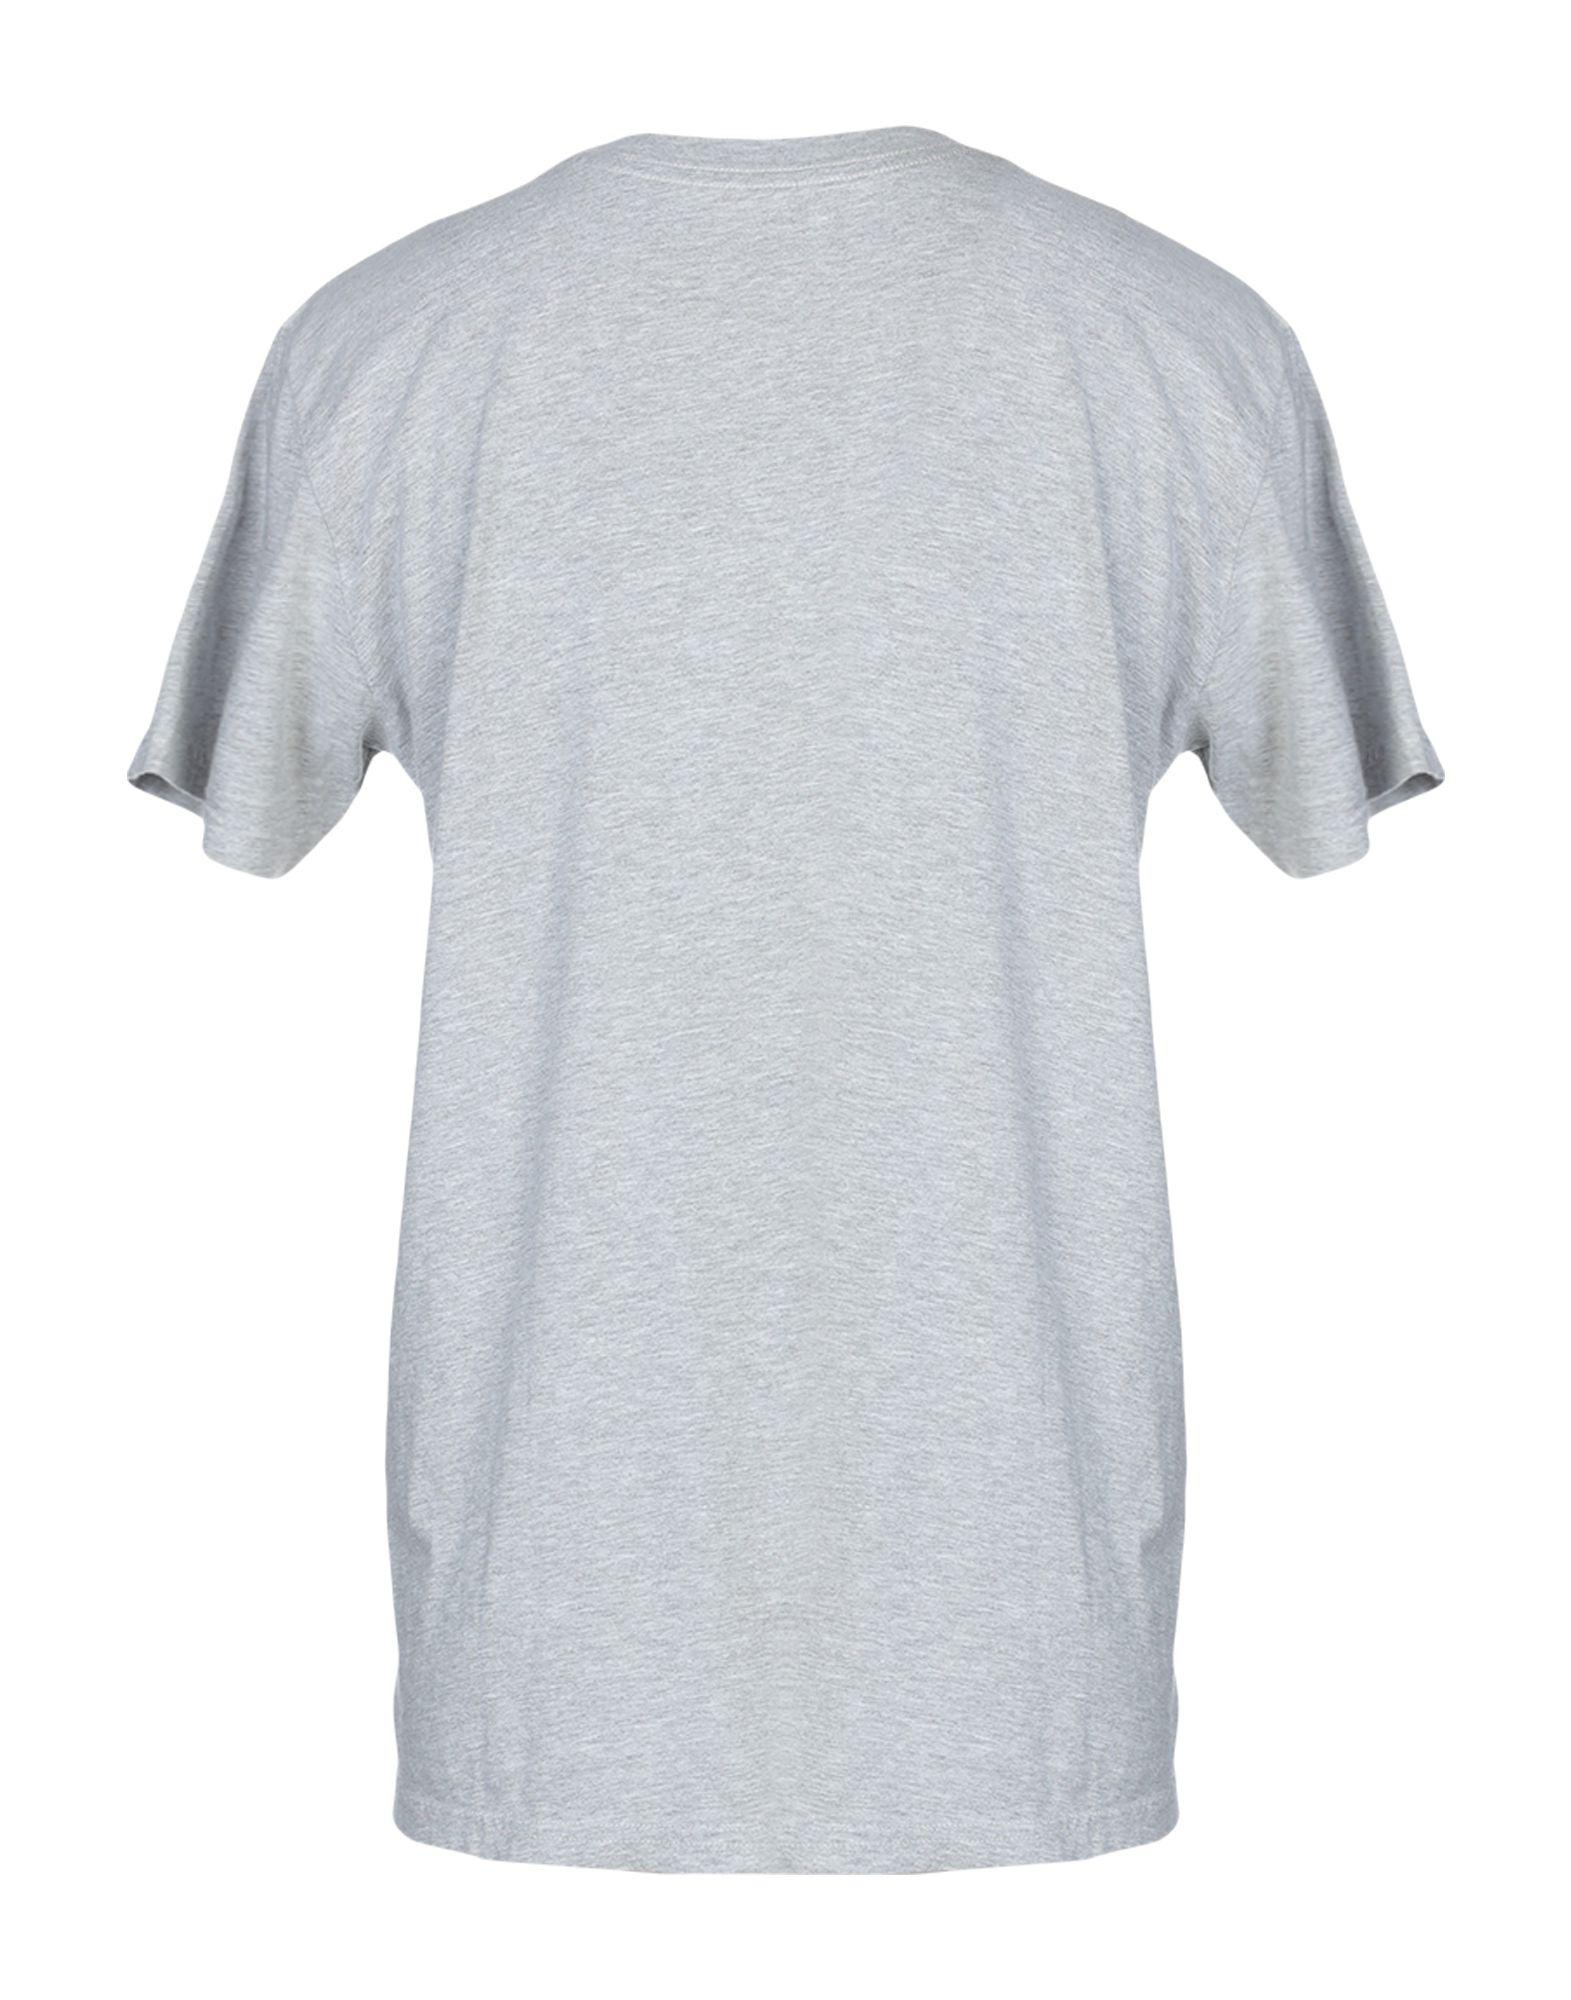 Obey T-shirt in Gray for Men - Lyst